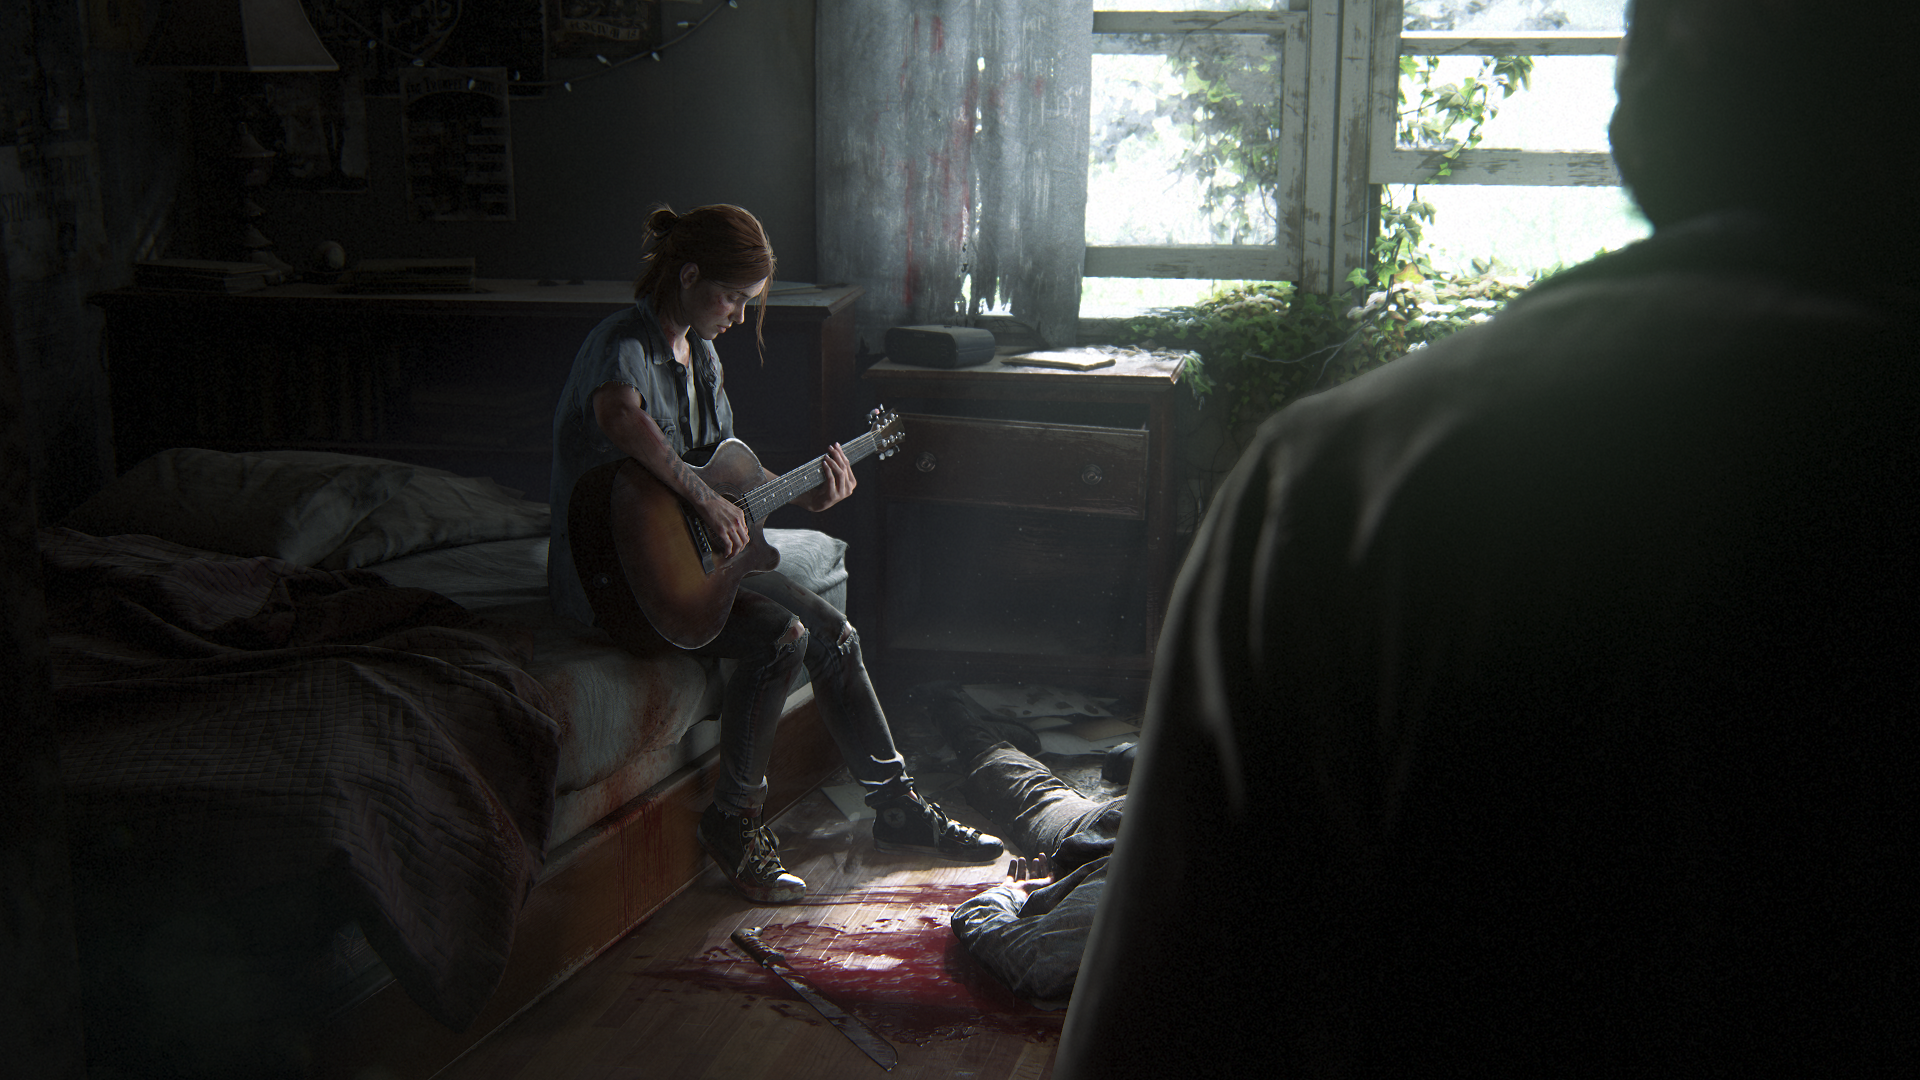 The Last of Us Part